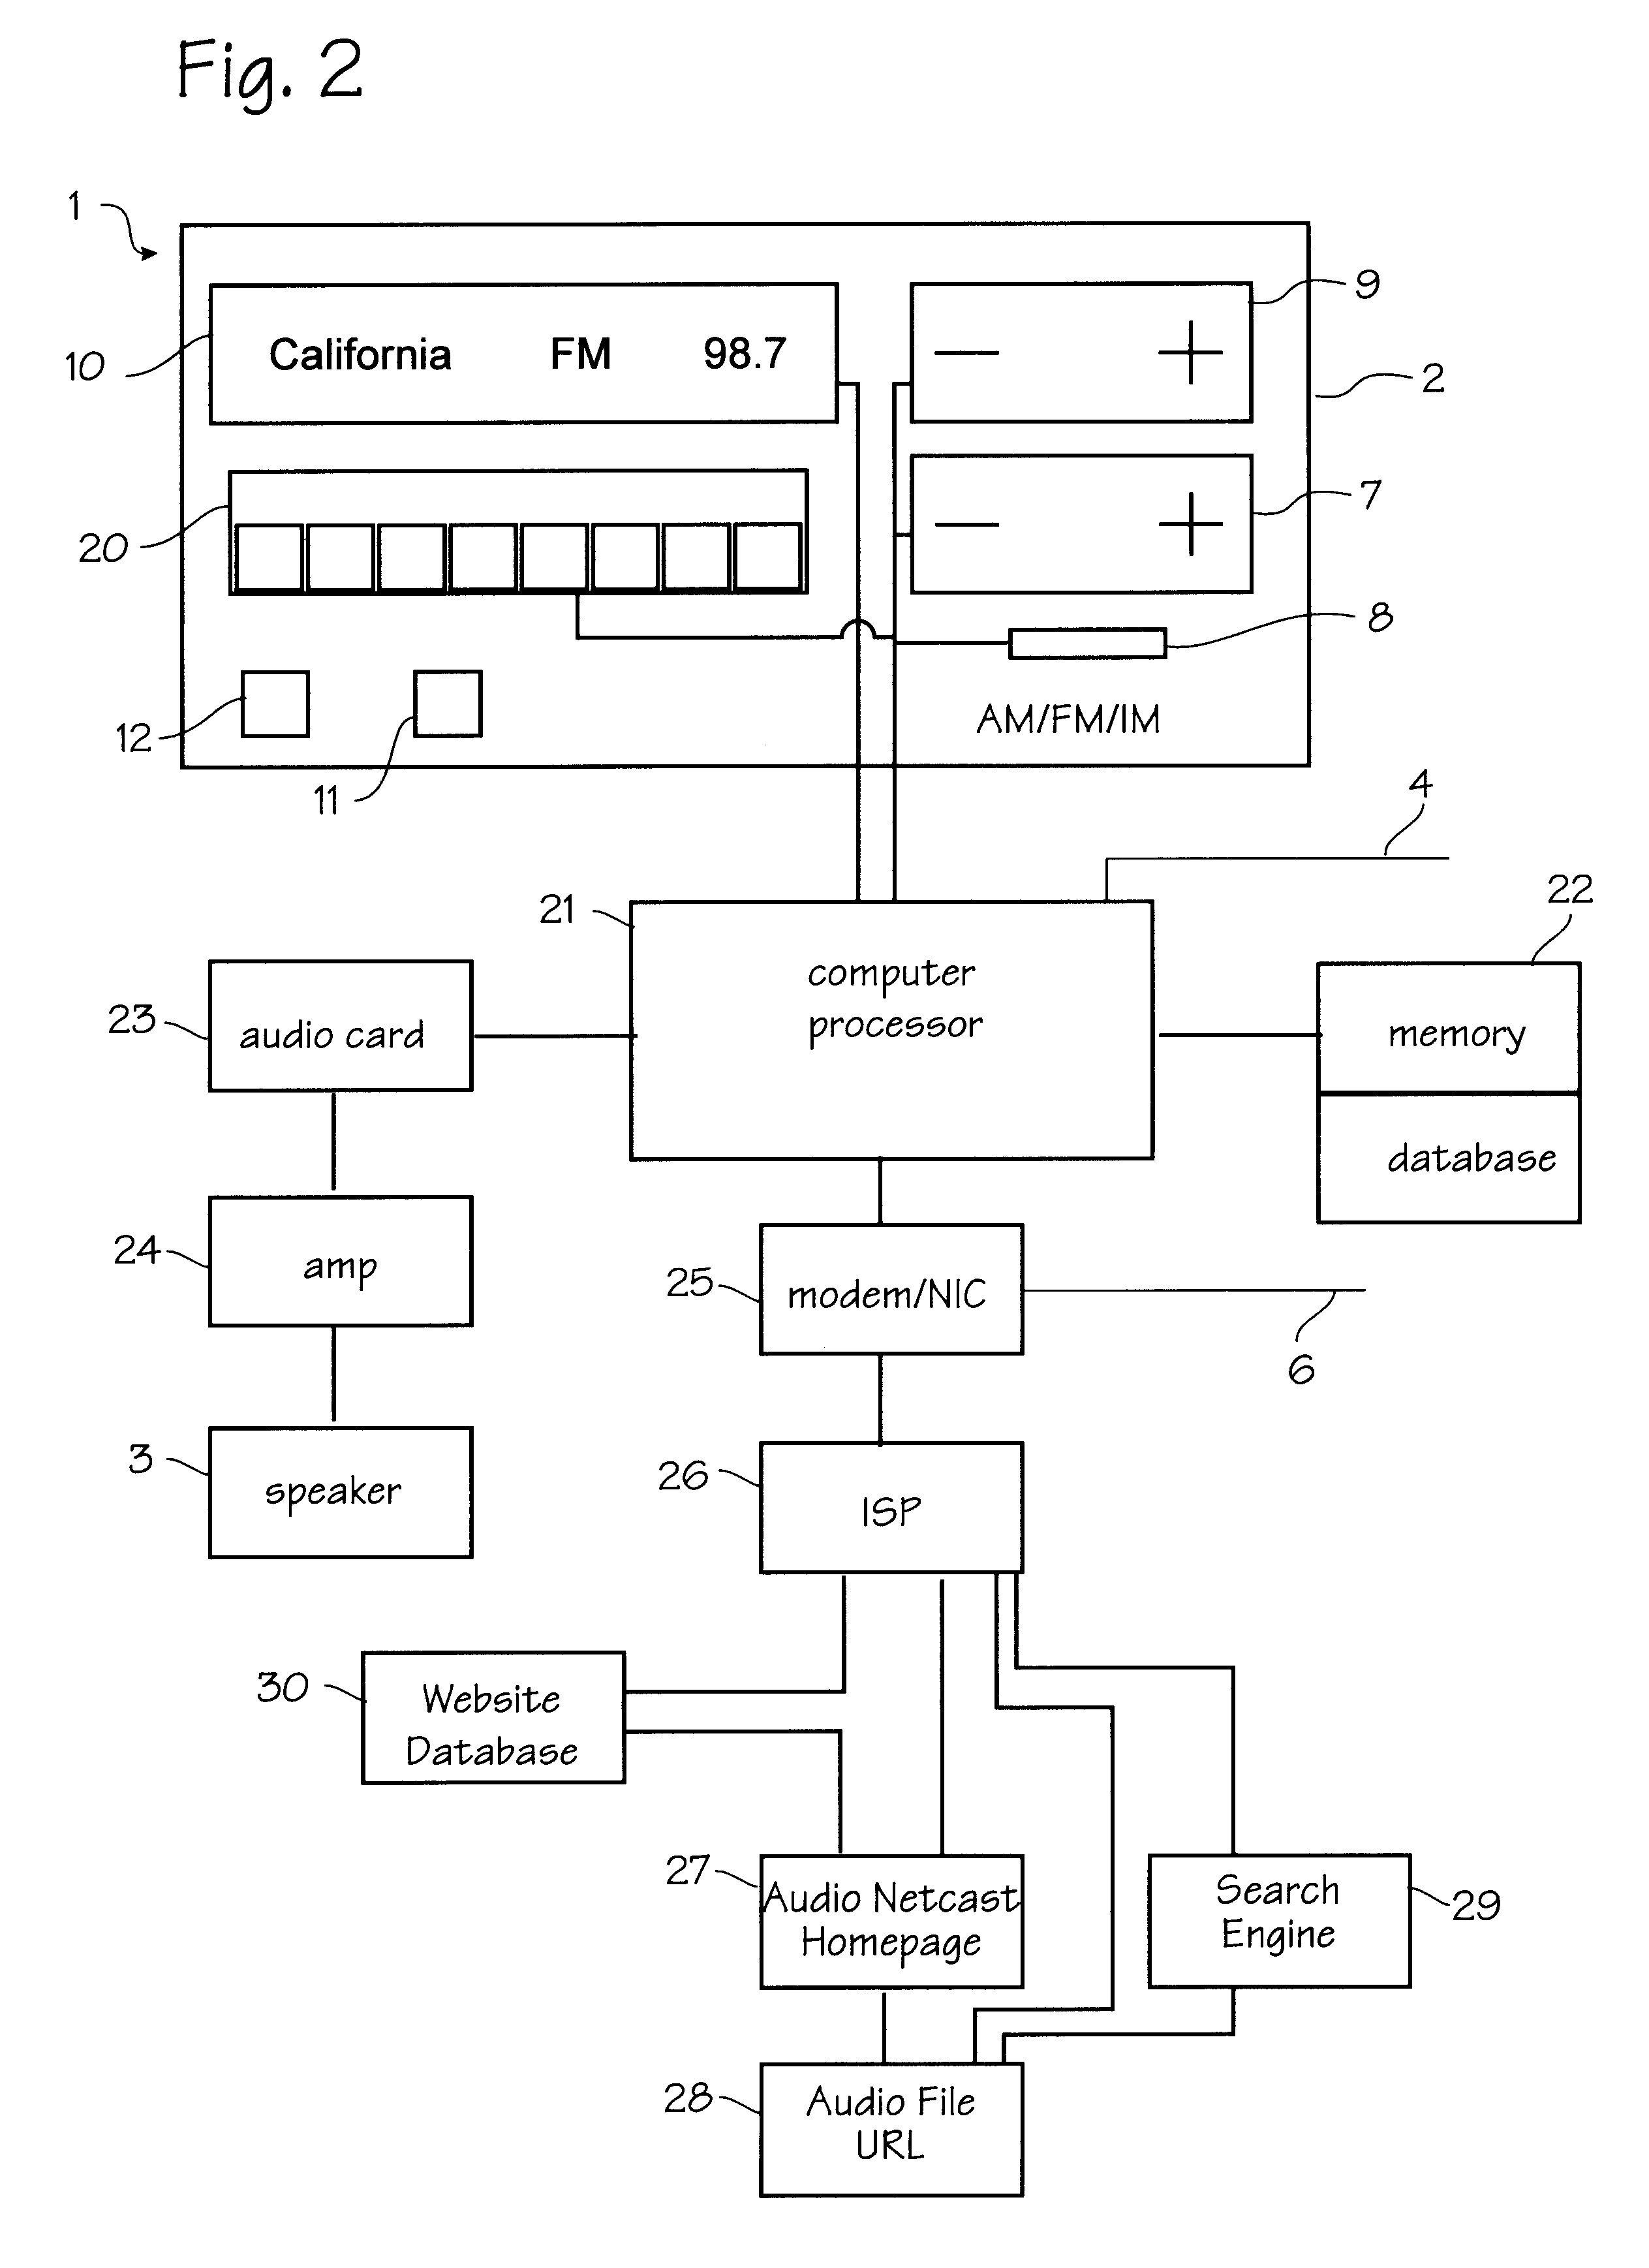 Internet radio receiver having a rotary knob for selecting audio content provider designations and negotiating internet access to URLS associated with the designations